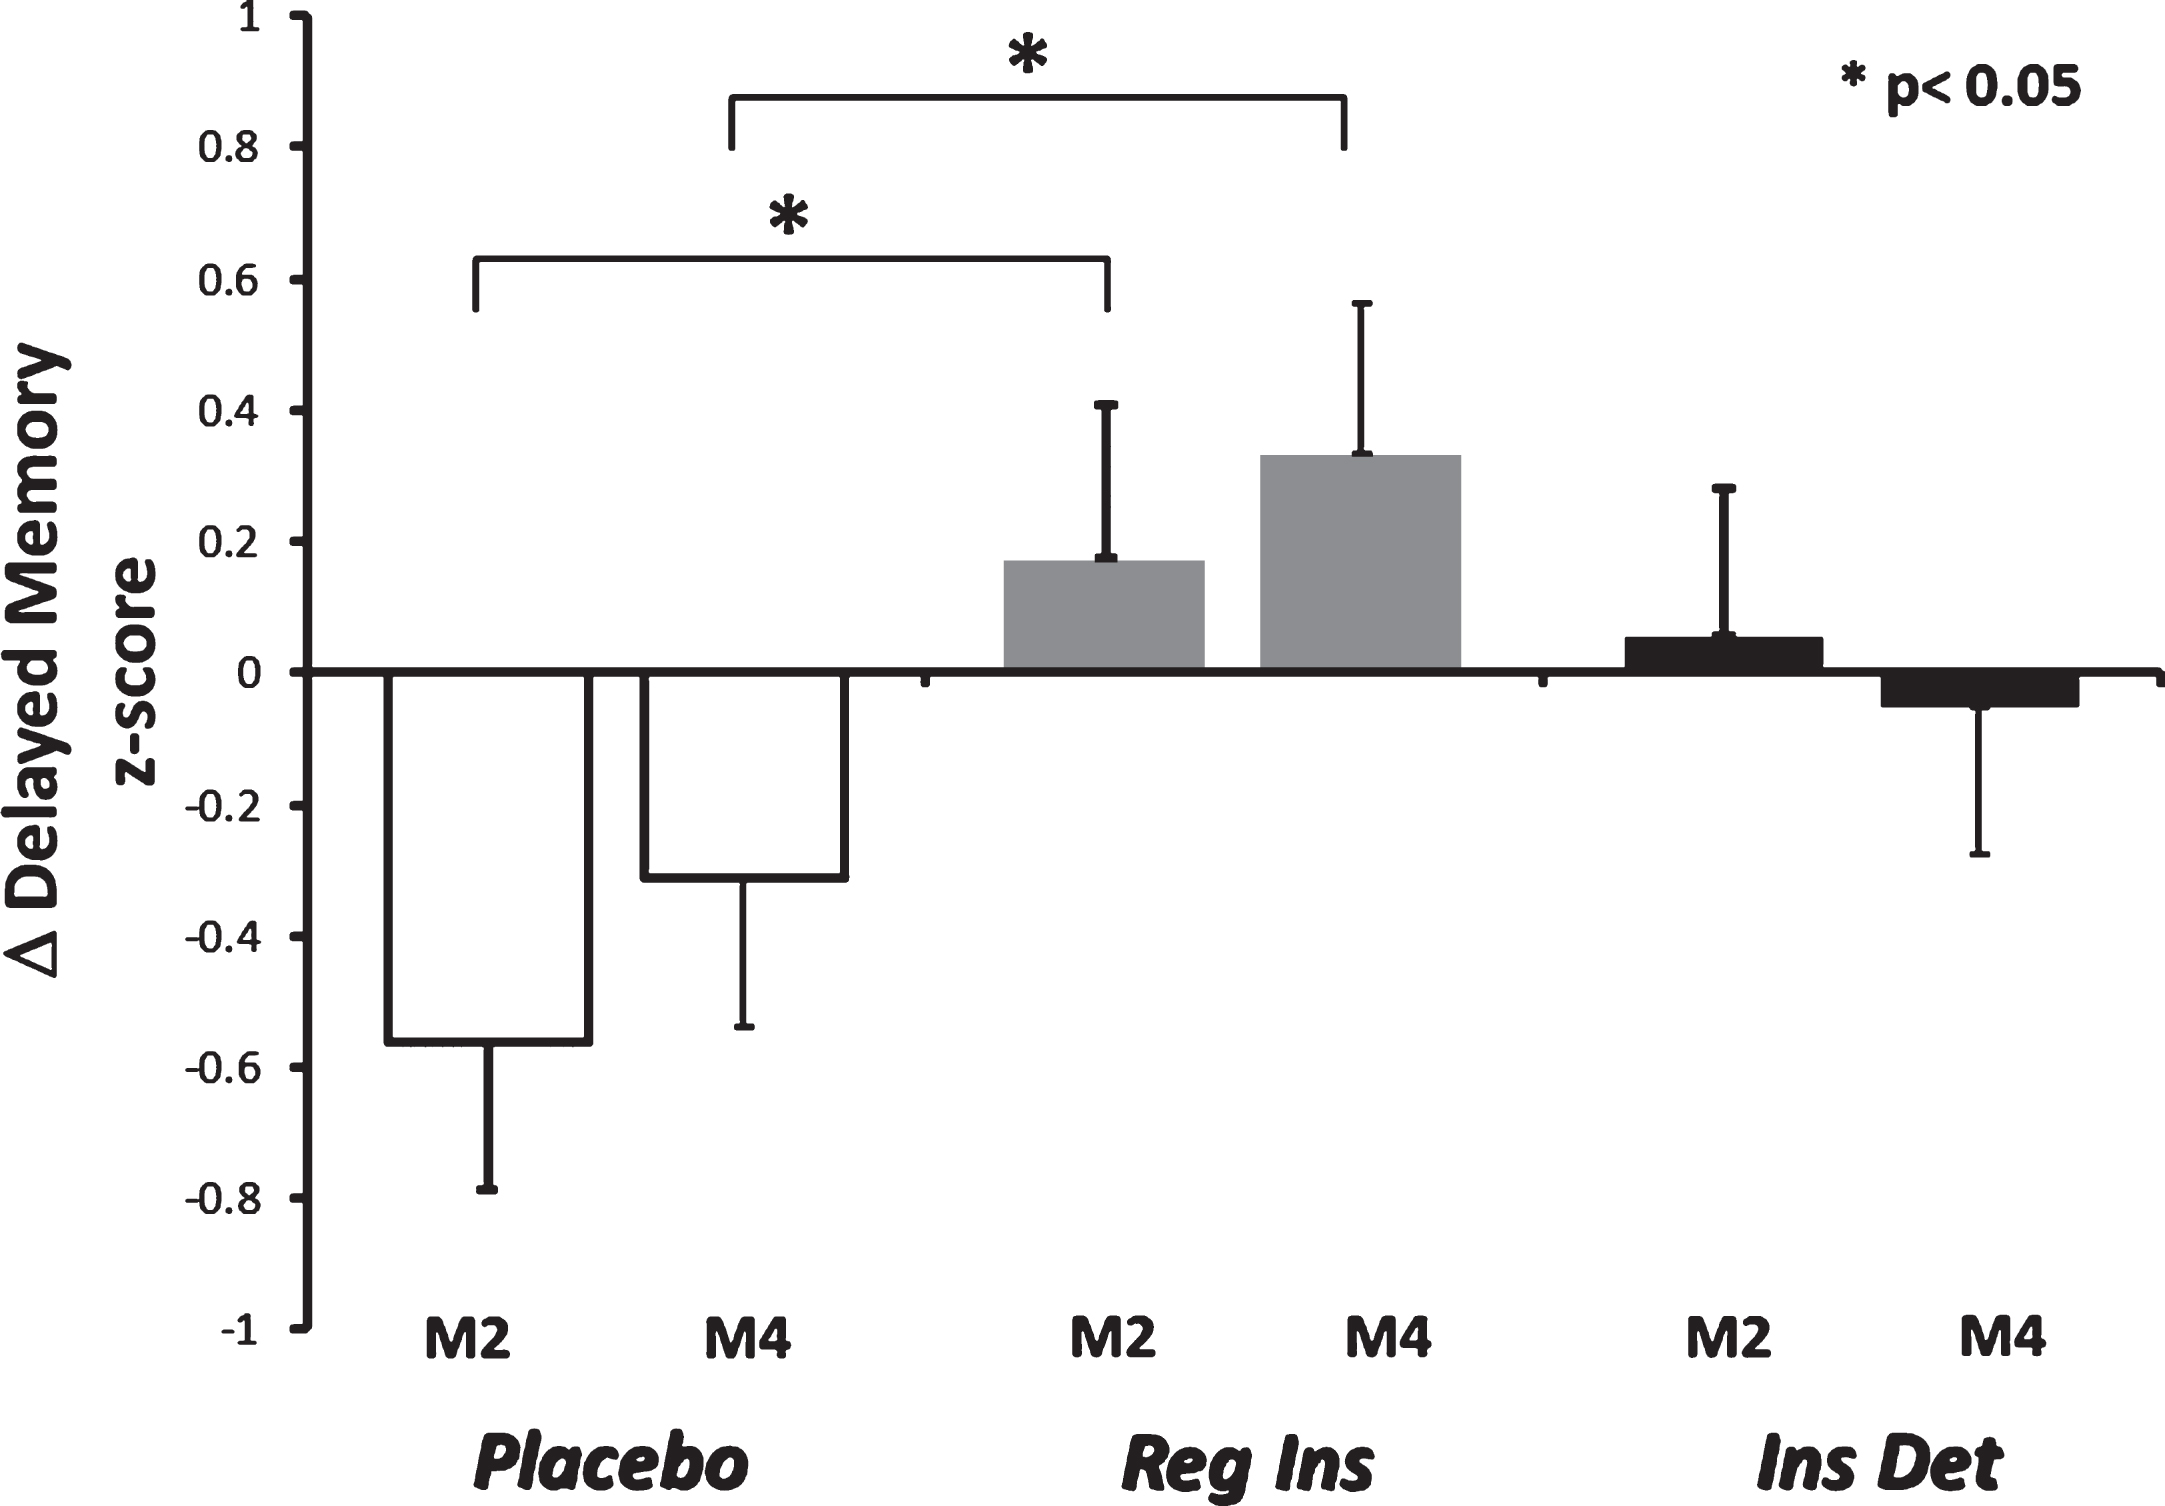 Change from baseline for delayed memory composite Z score for placebo-assigned, regular insulin-treated, and detemir-treated groups. The regular insulin group had improved memory compared with the placebo group after two (p < 0.03) and four (p < 0.05) months of treatment. No differences were observed between placebo and detemir groups.